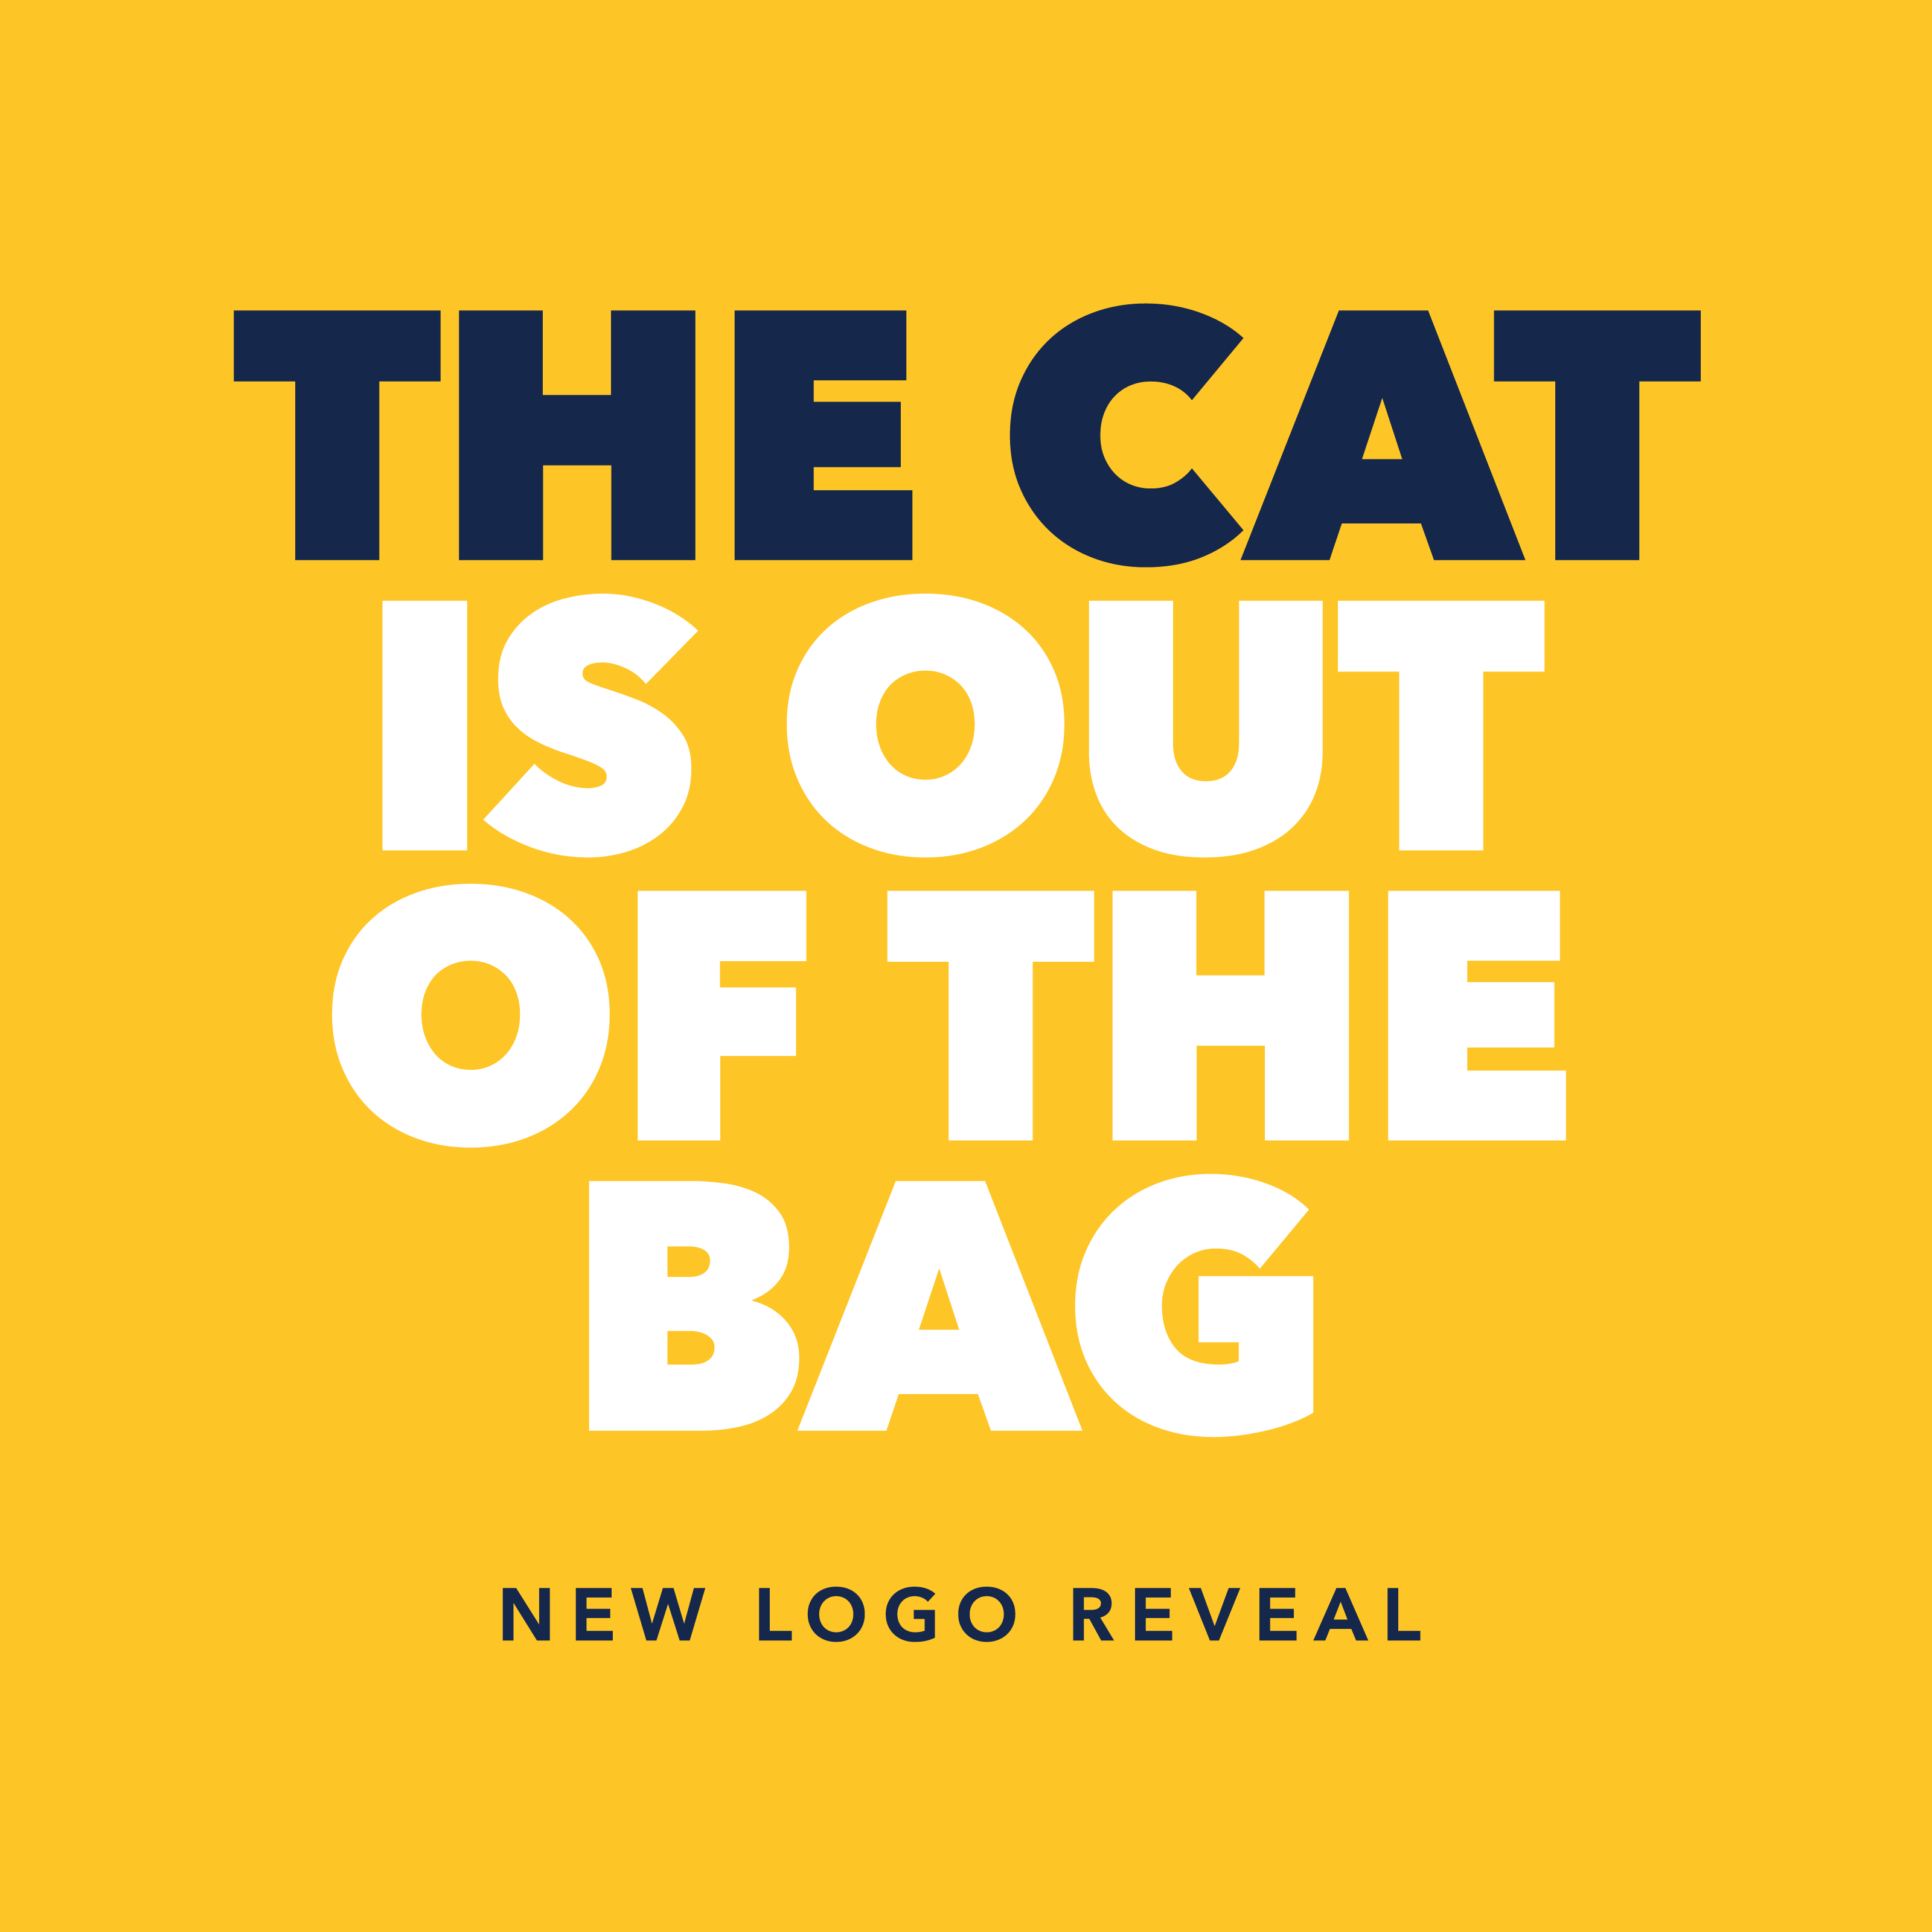 The cat is out of the bag - STC has a new logo.